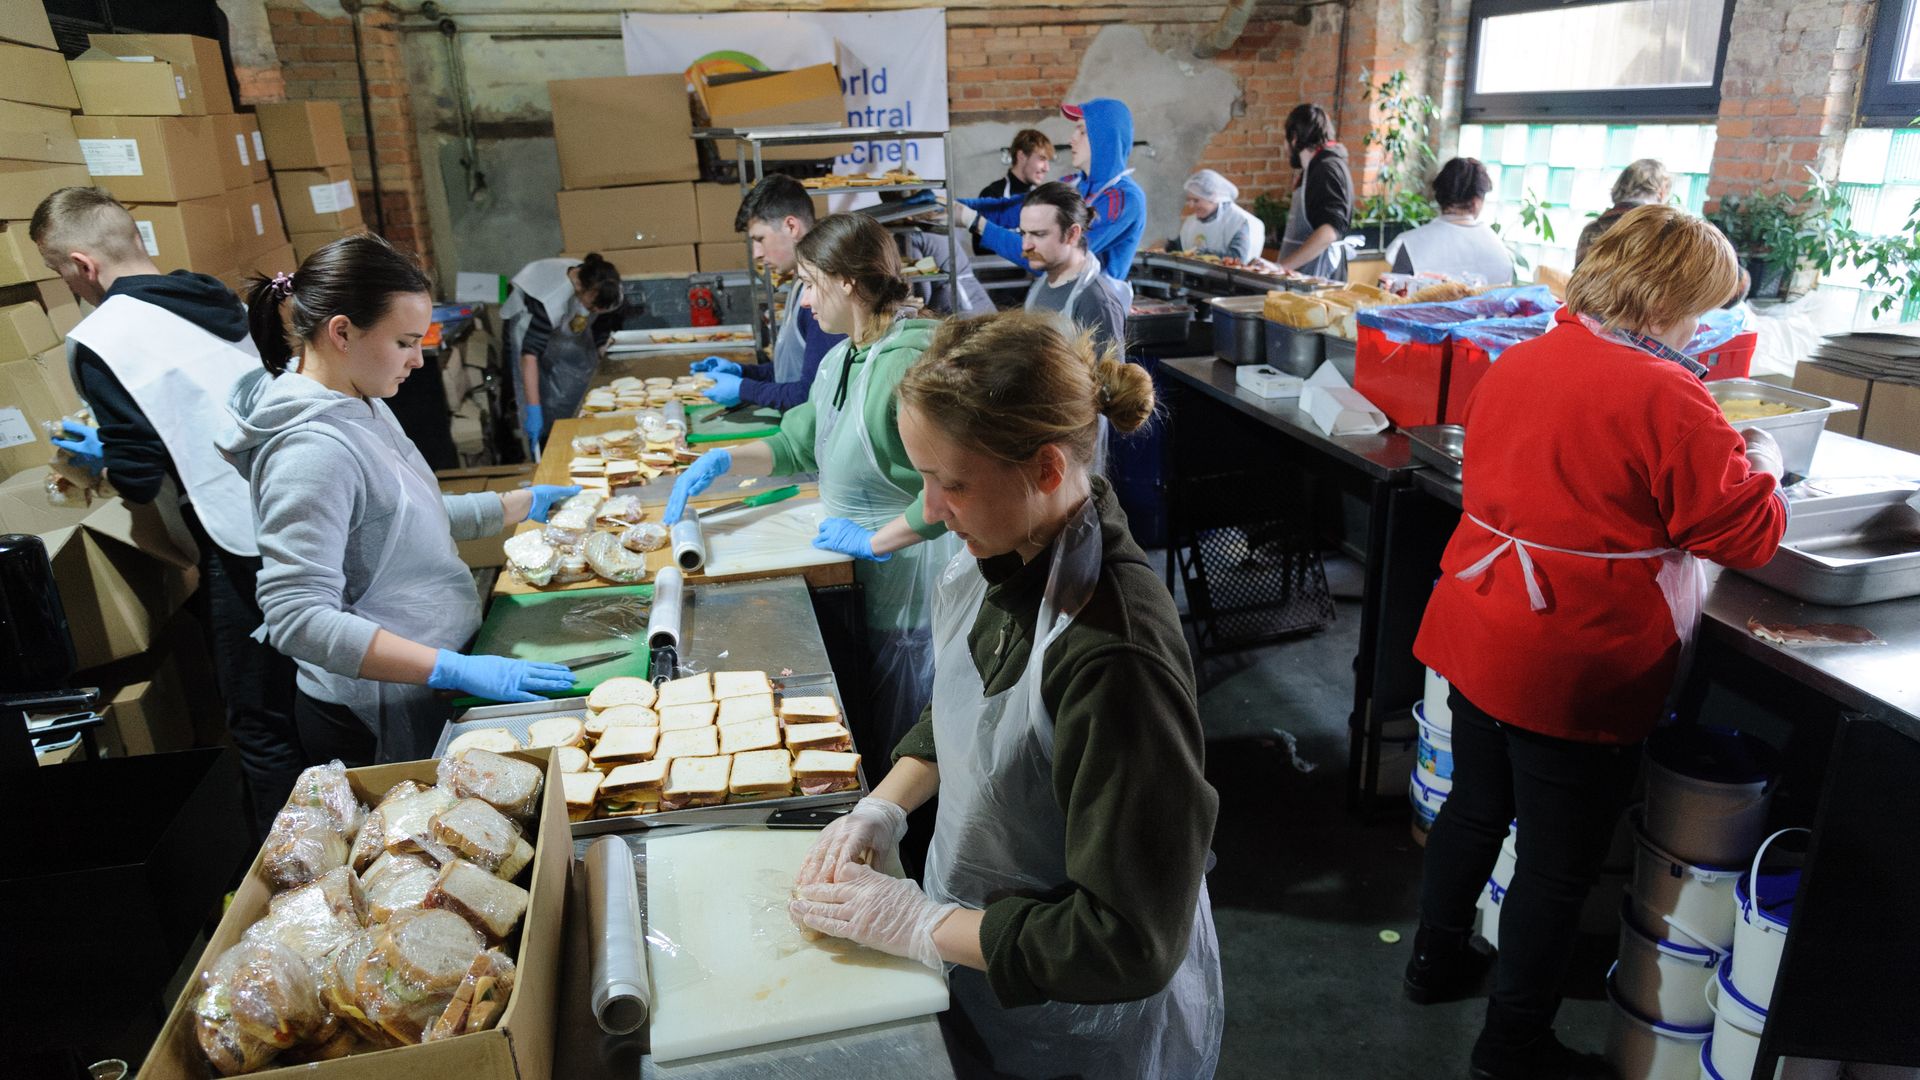 Staff members of a local restaurant together with the organization World Central Kitchen prepare sandwiches